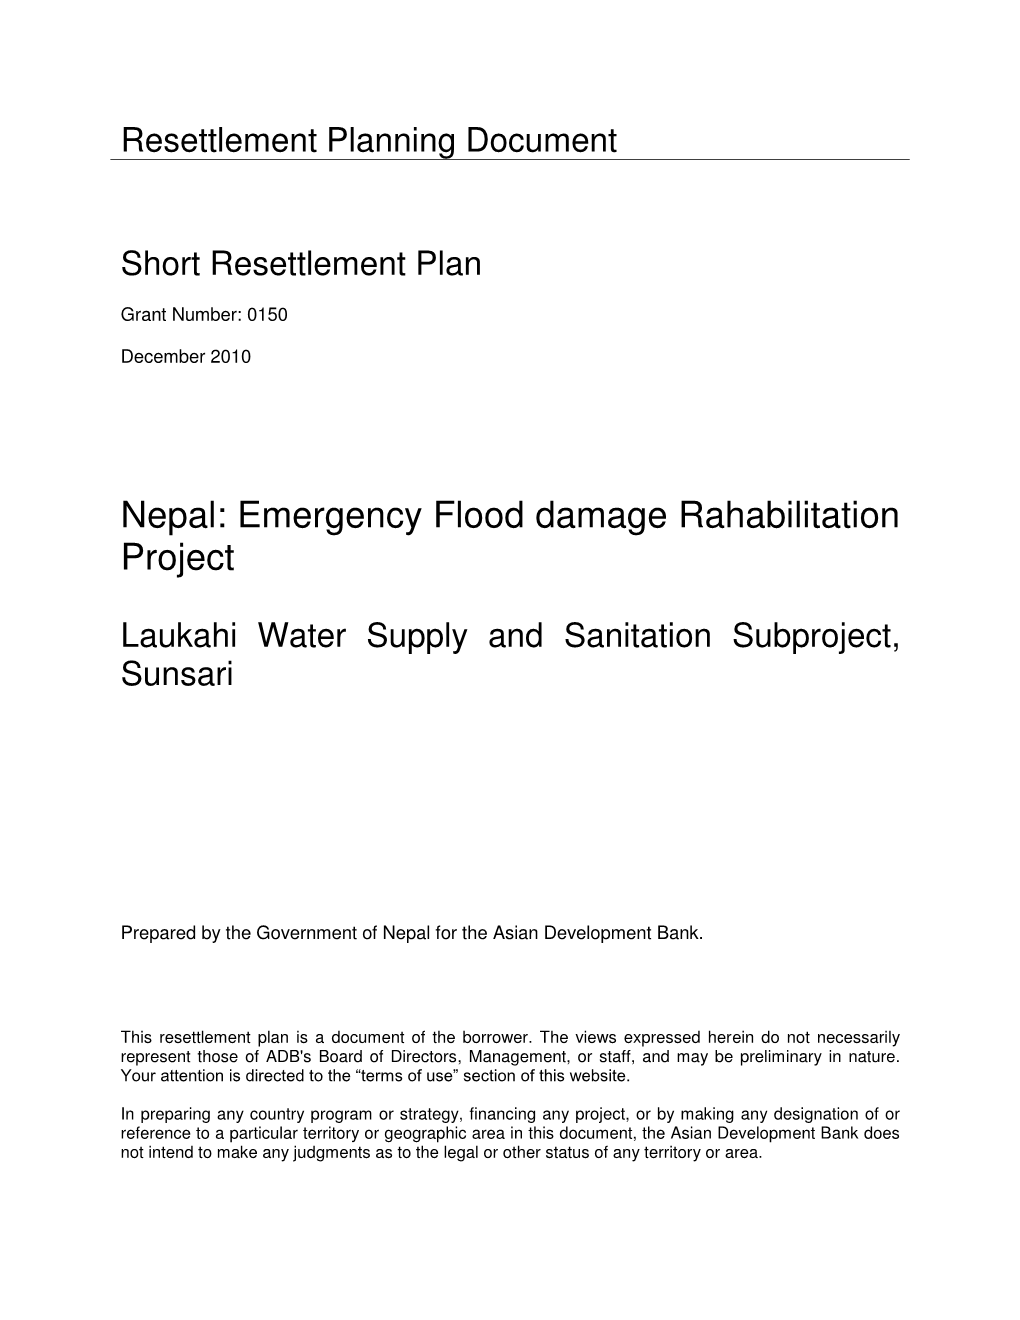 43001-012: Laukahi Water Supply and Sanitation Subproject Resettlement Plan